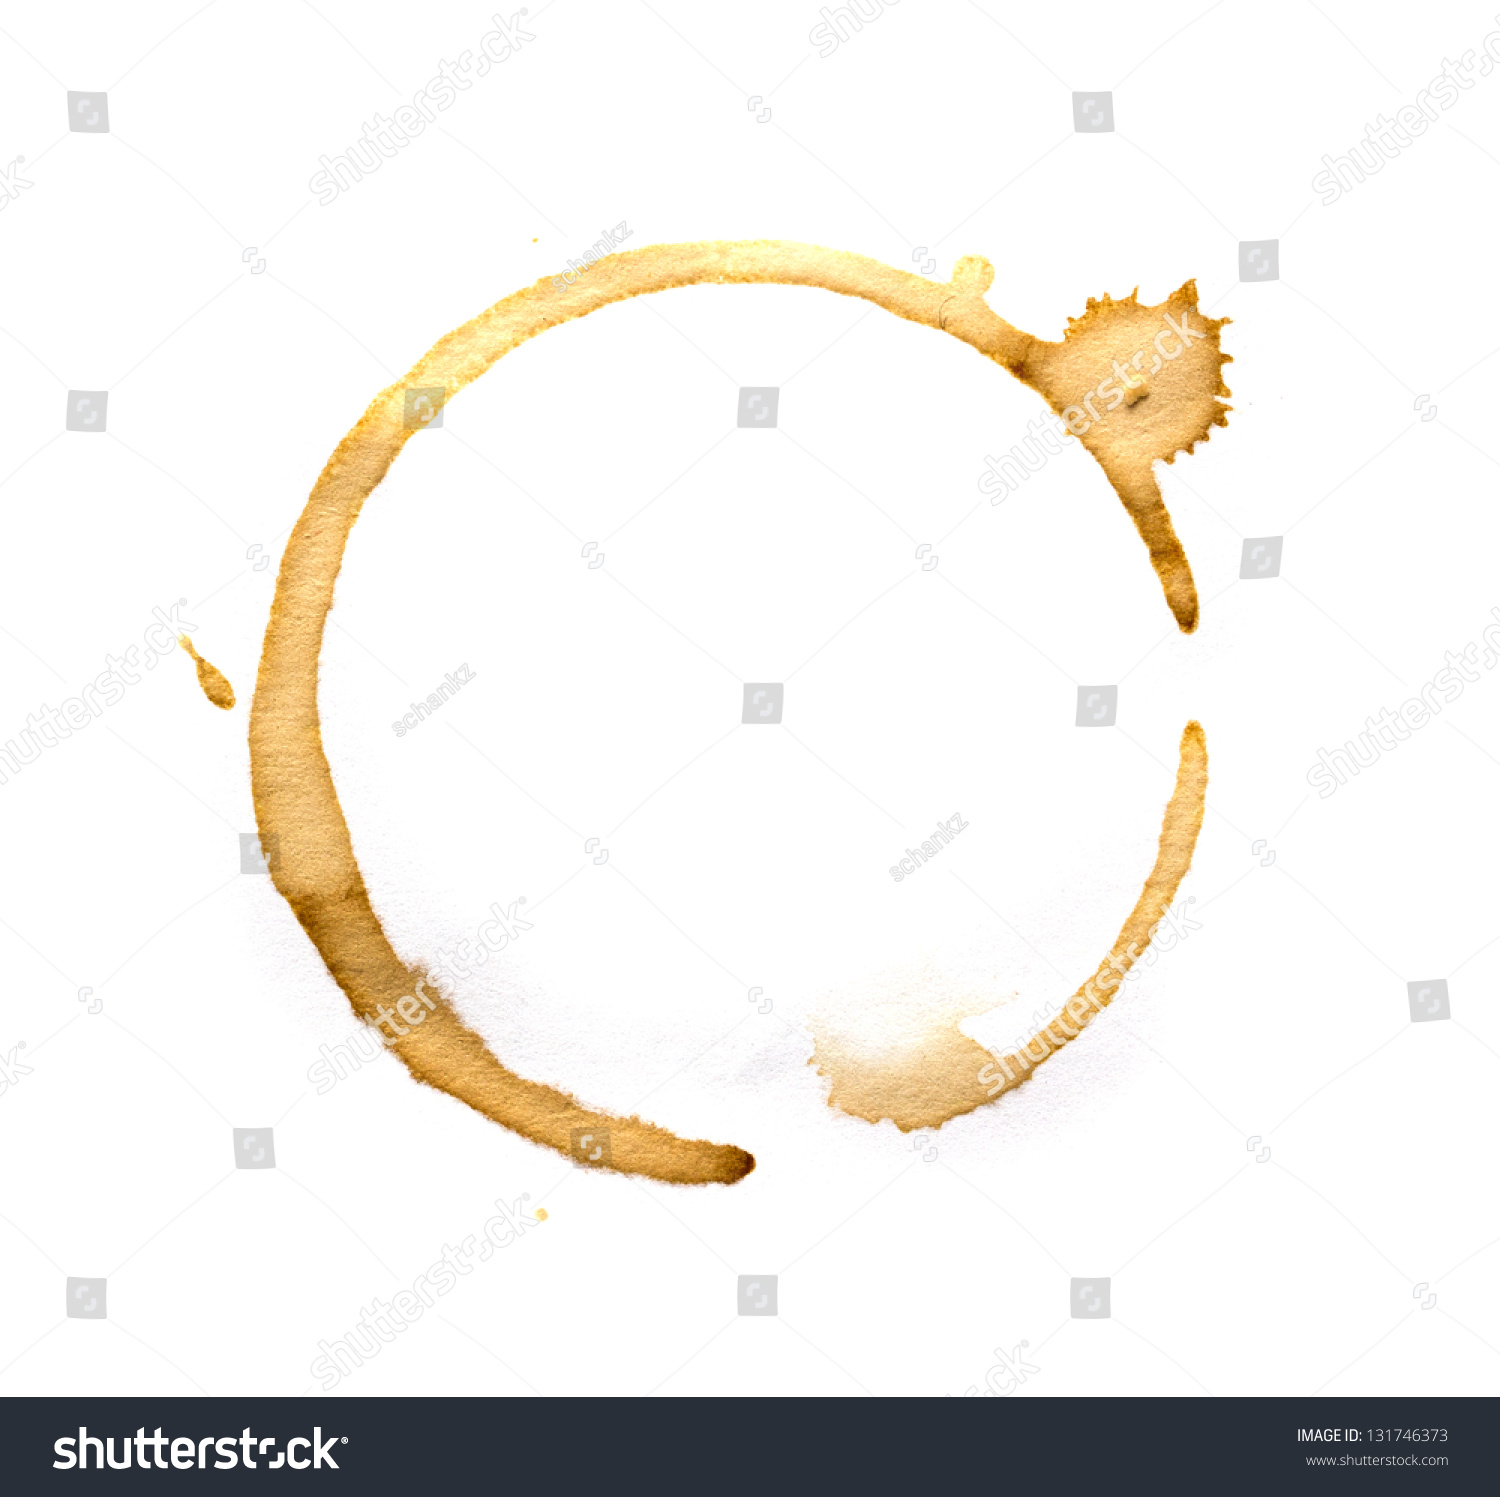 Coffee cup rings isolated on a white background. #131746373